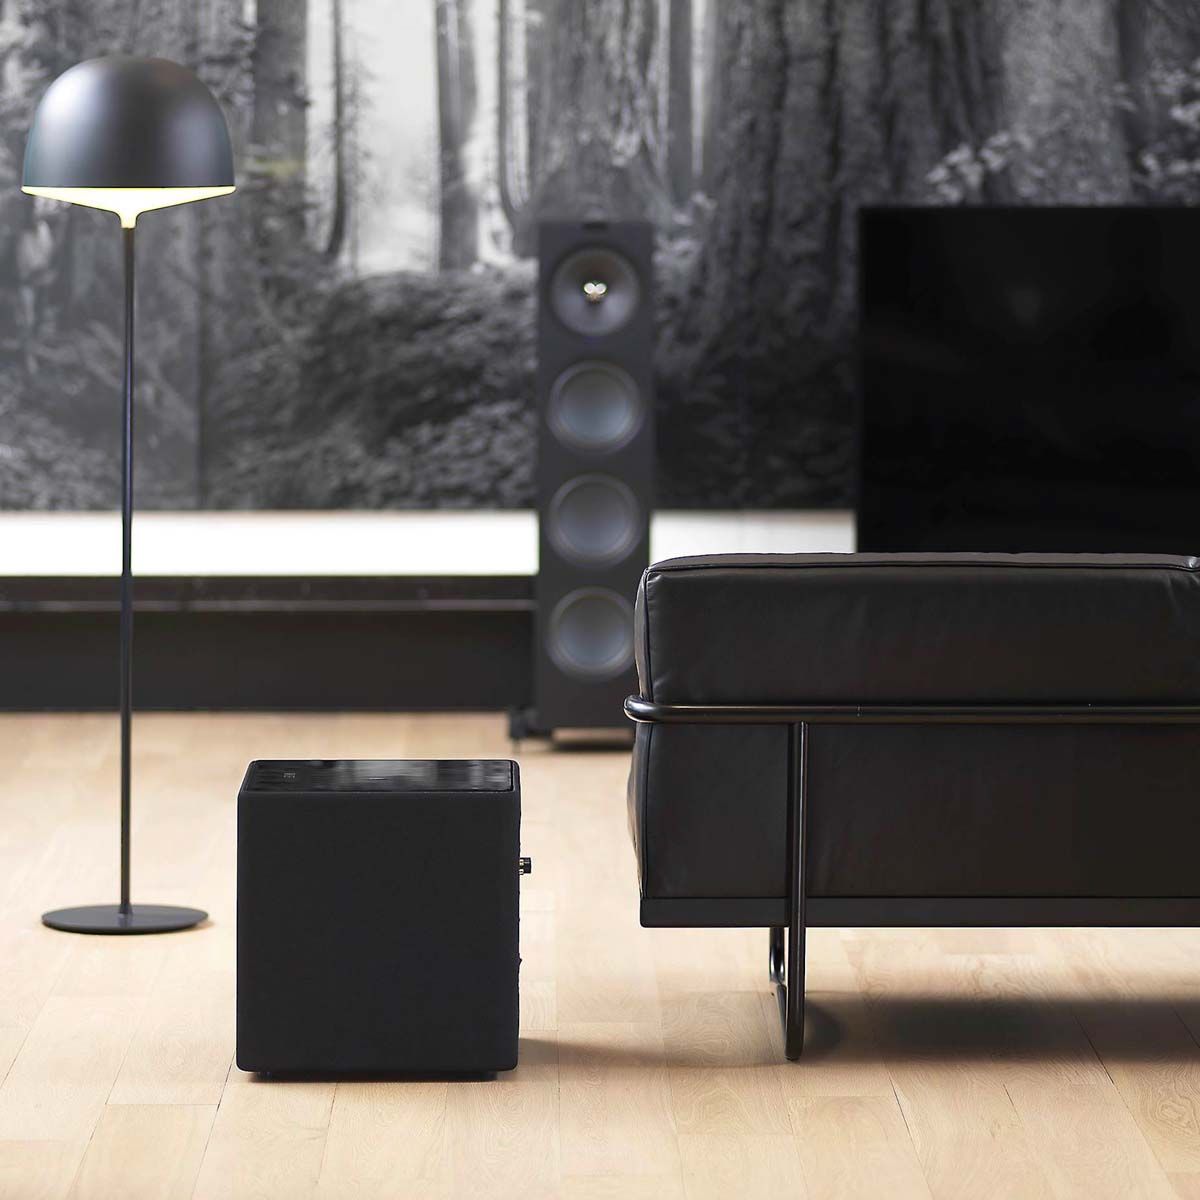 KEF KUBE12b 12-inch Bass Driver Active Subwoofer - Gloss Black - Each - on floor next to couch